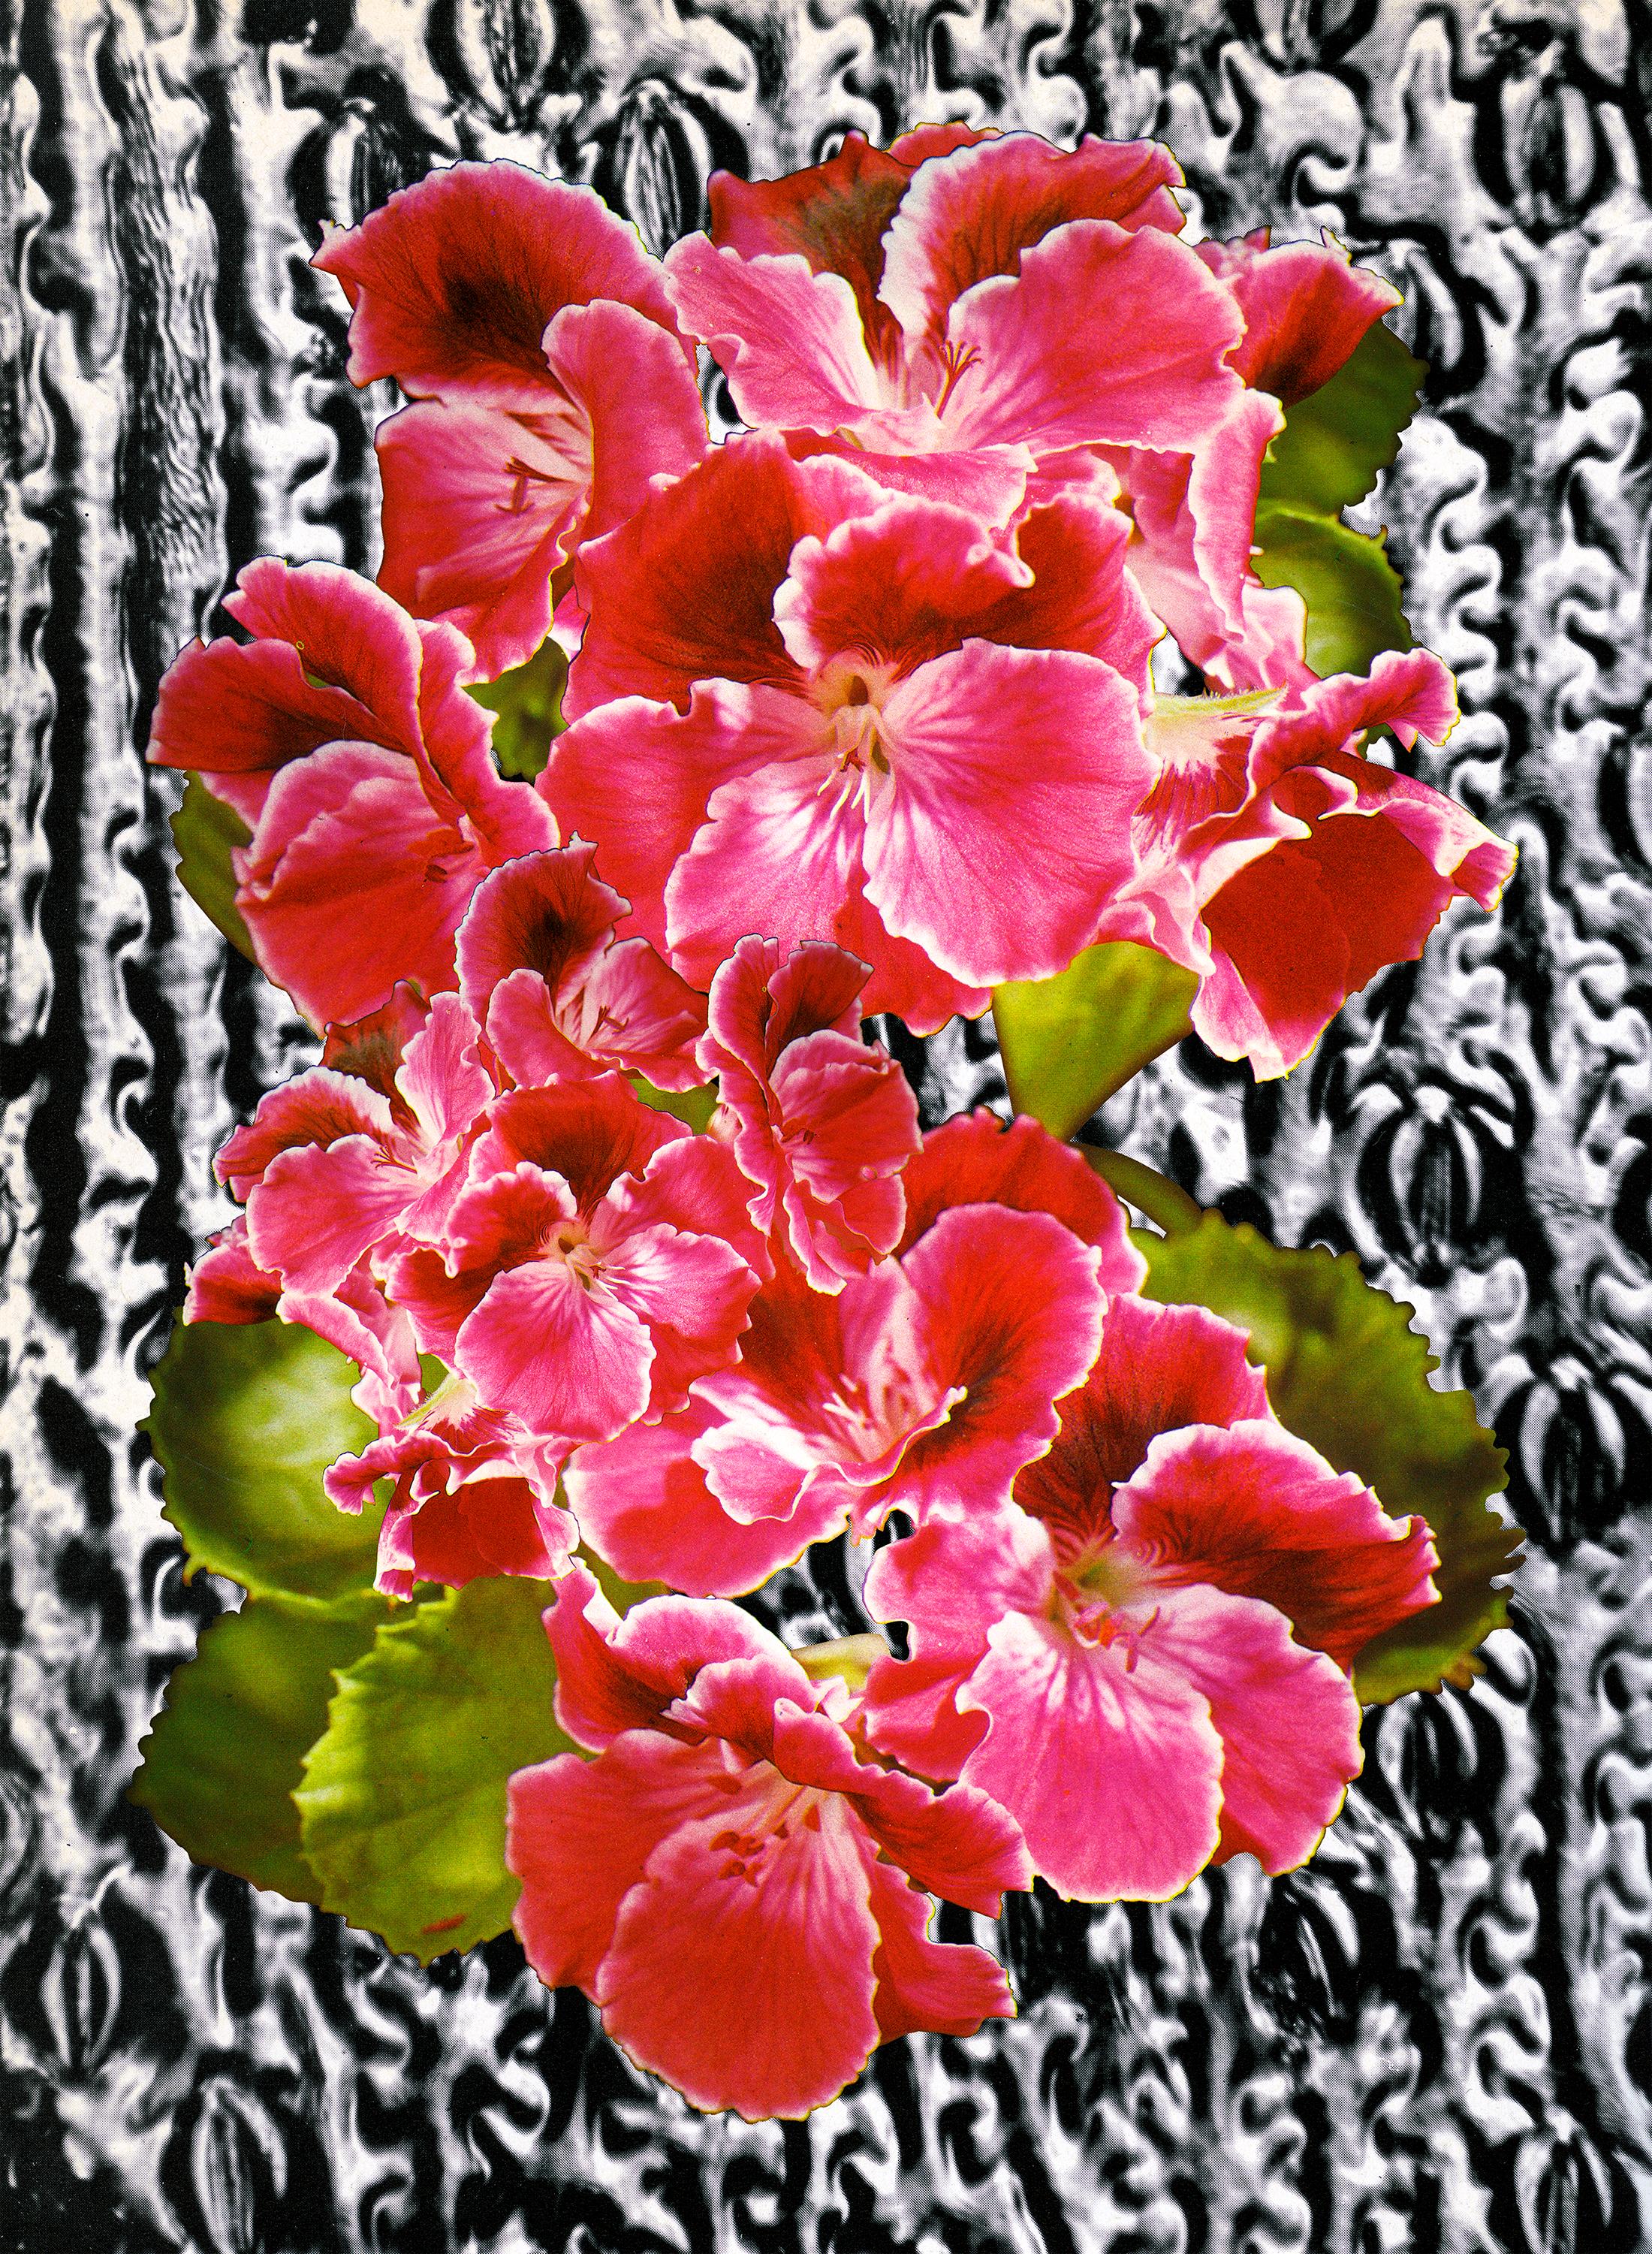 Big Pink - bright photo of vibrant flower, magenta black and white (11 x 15) - Print by Laura Kay Keeling 